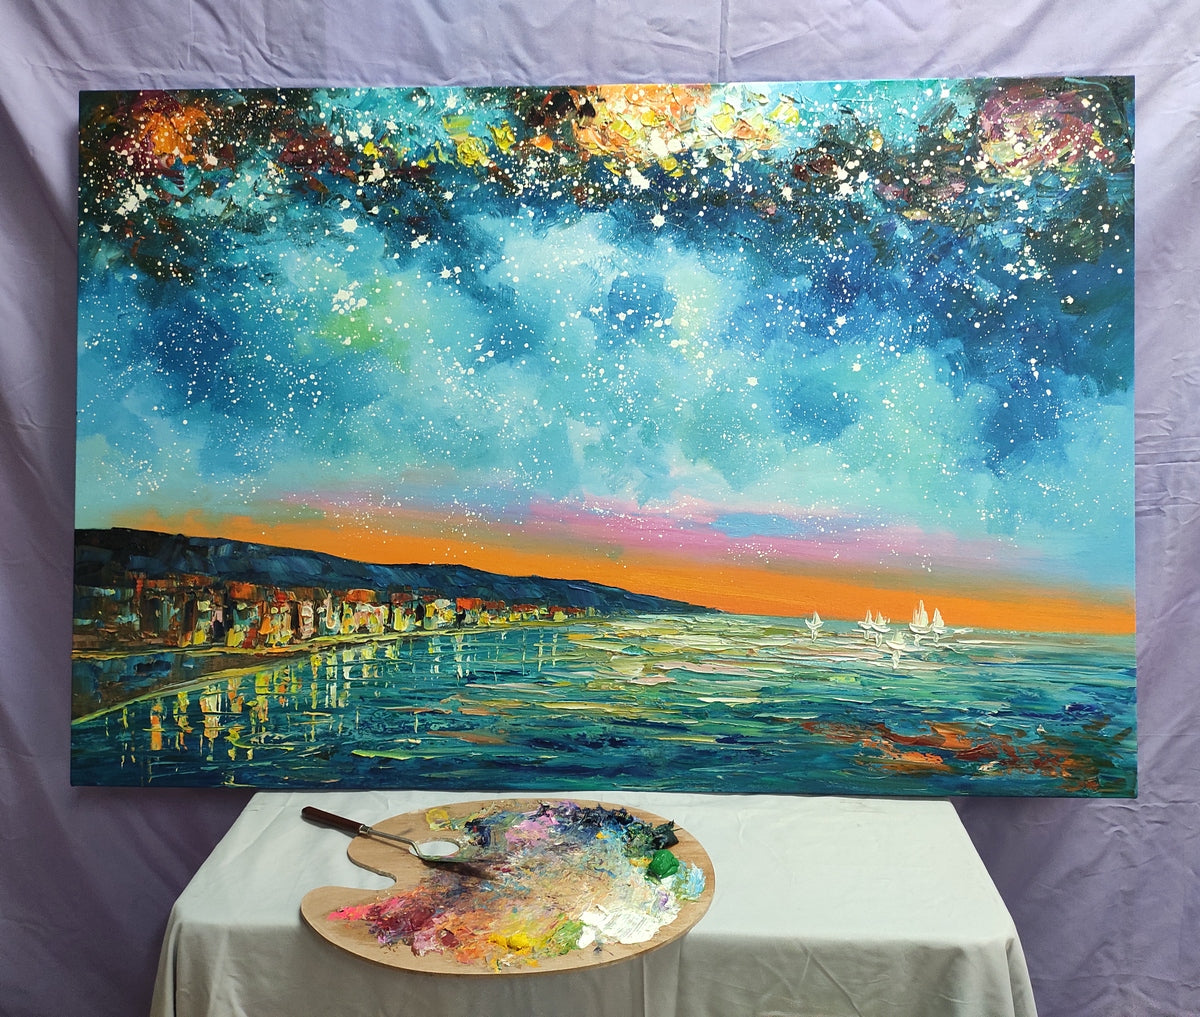 Starry Night Sky Painting, Oil Painting on Canvas, Original Landscape Paintings, Landscape Canvas Paintings, Palette Knife Paintings